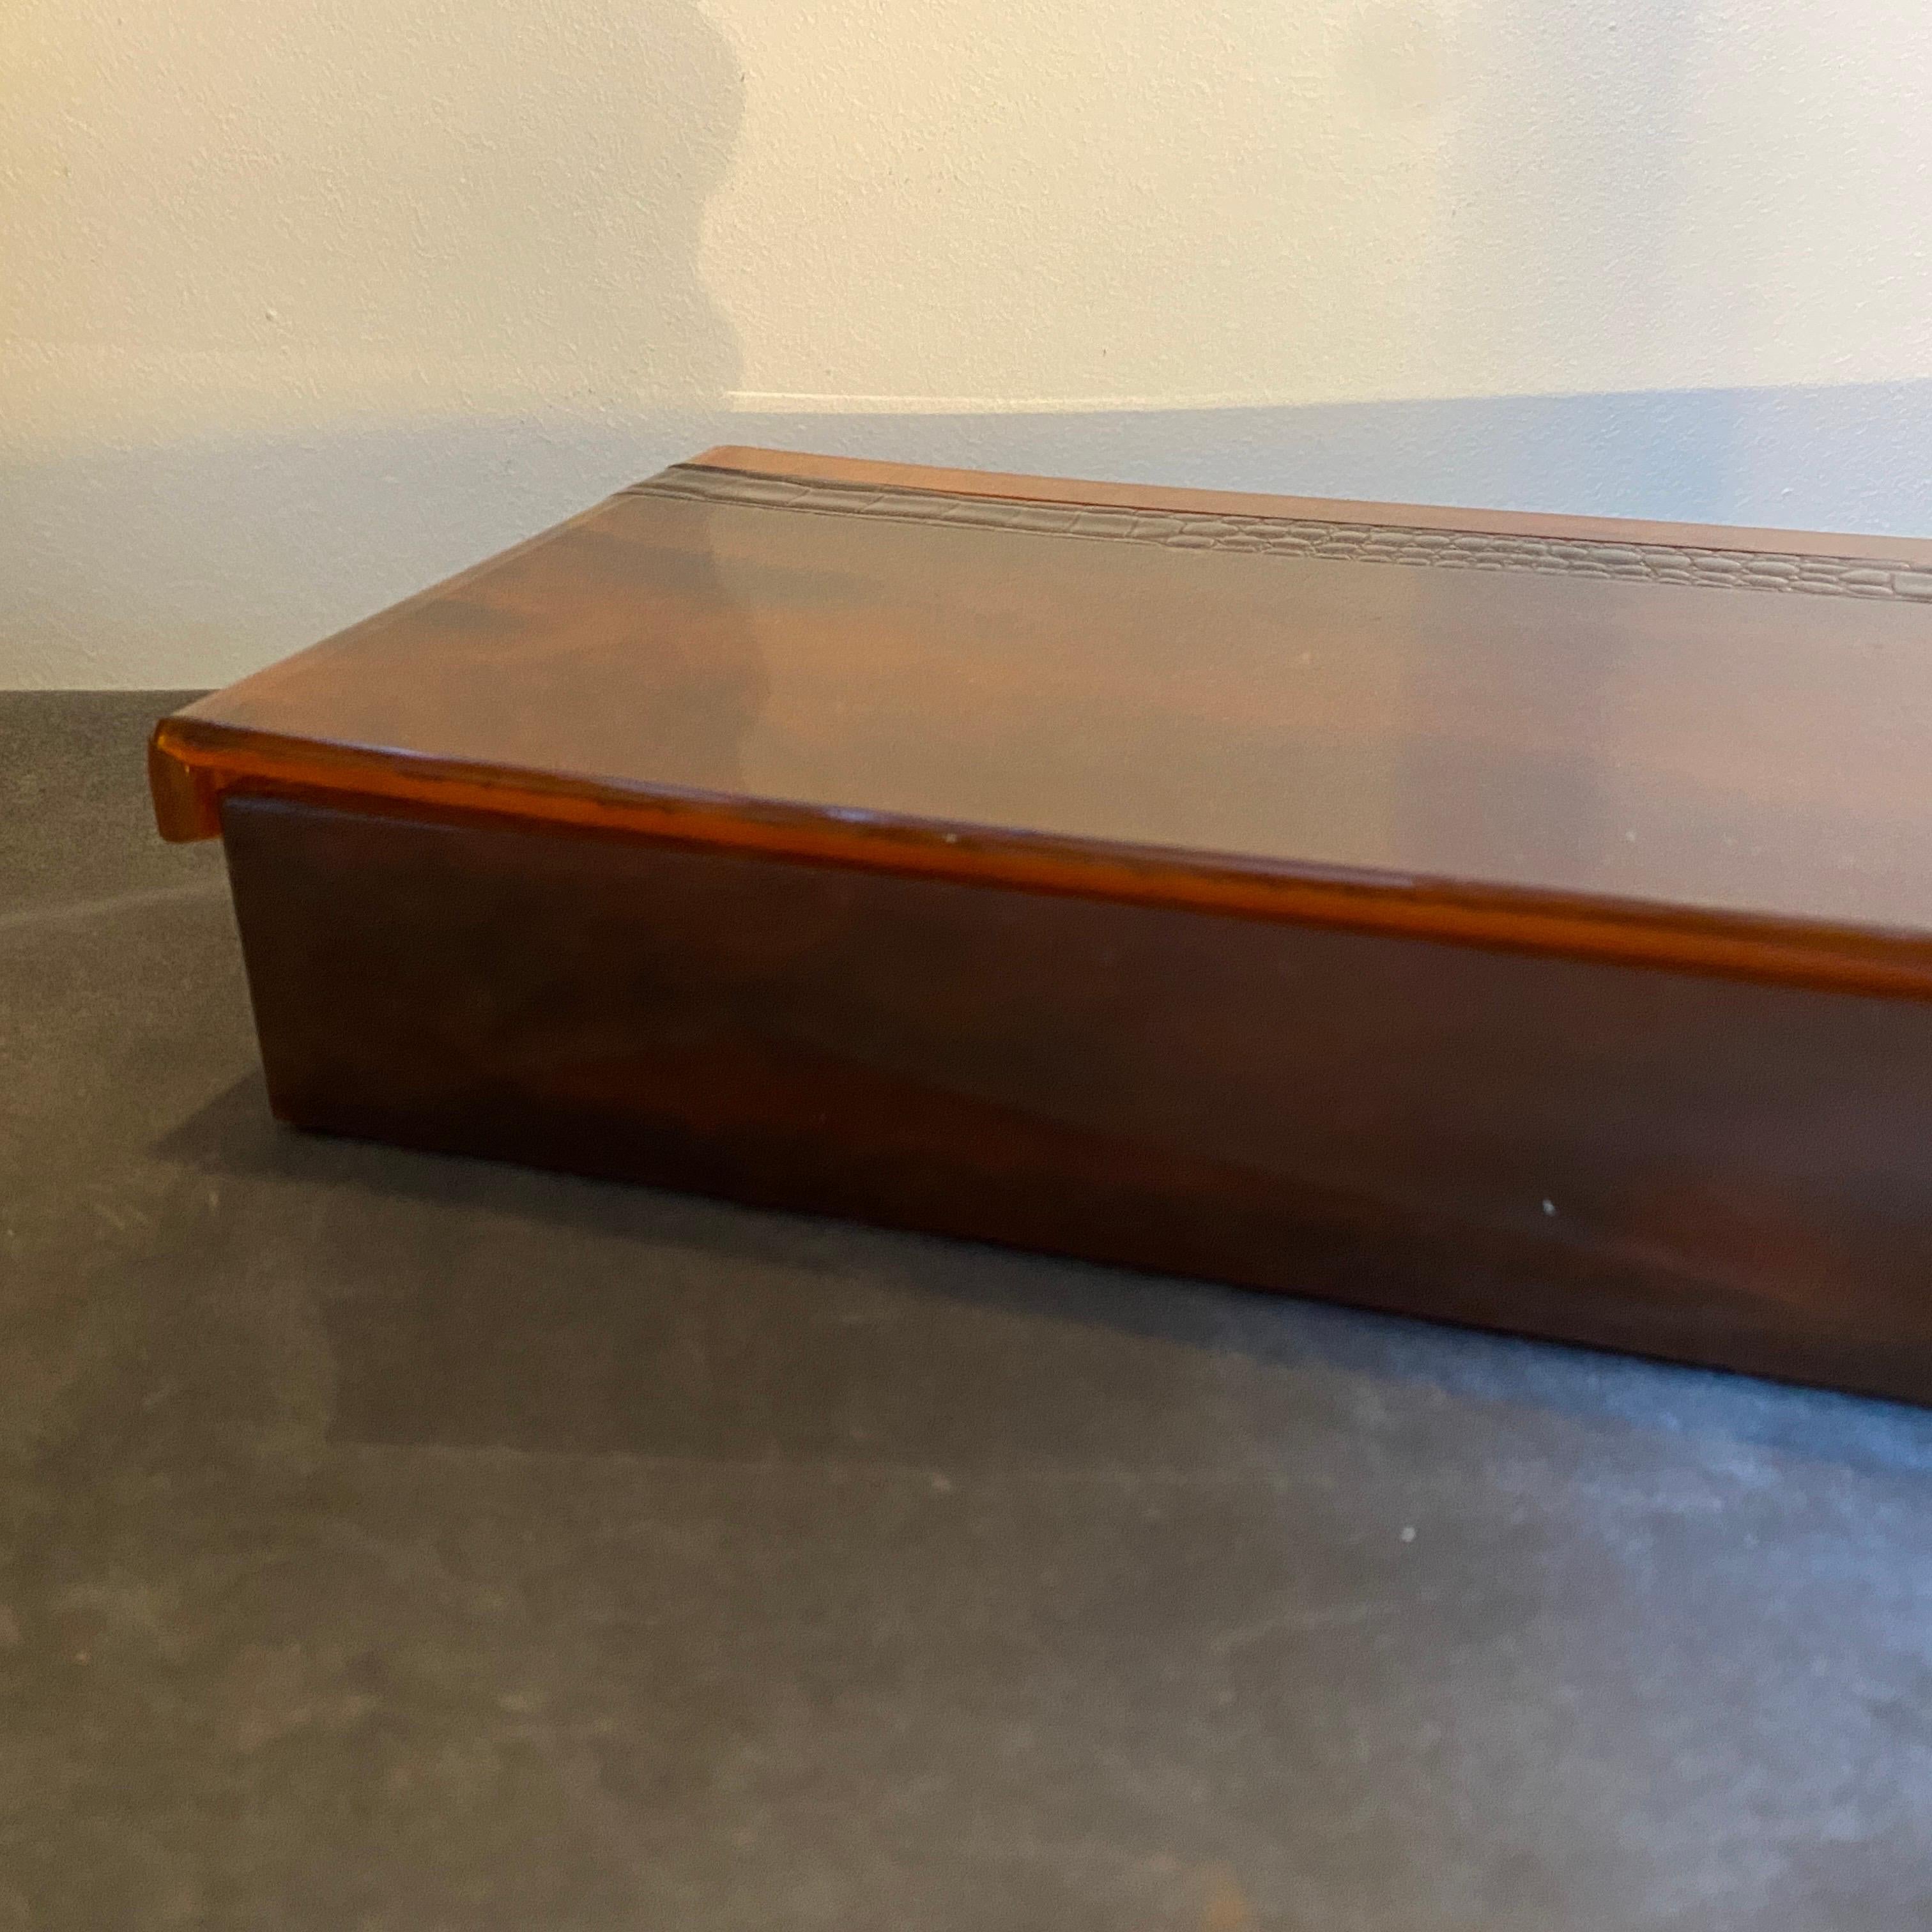 A rare lucite jewelry box designed and manufactured in Italy in the Seventies, It's in very good conditions considering use and age